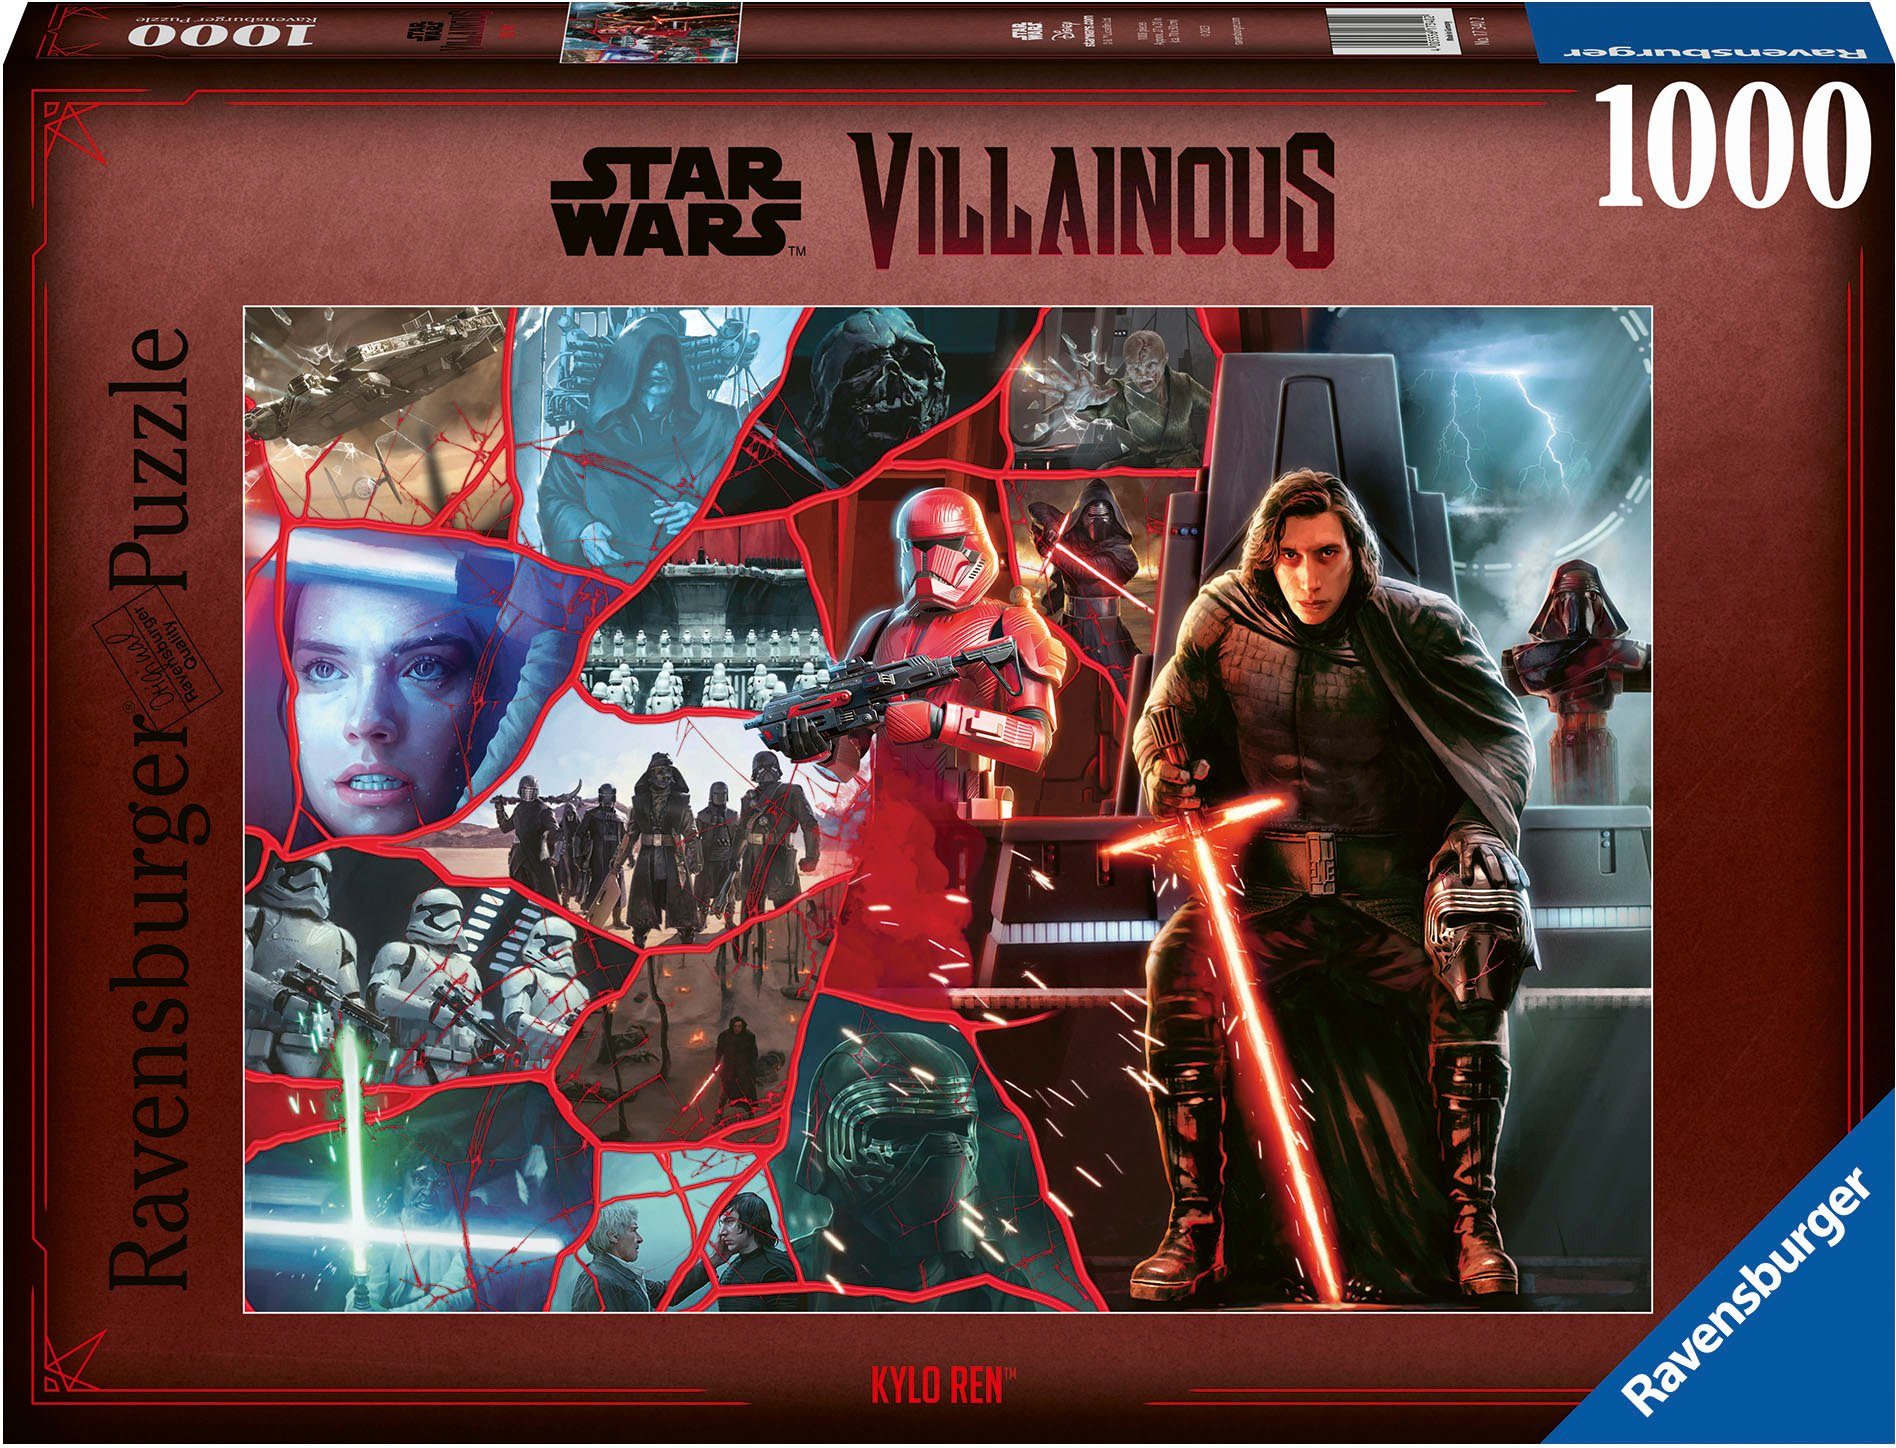 Ravensburger Puzzle Star Wars Villainous, Kylo Ren, 1000 Puzzleteile, Made in Germany